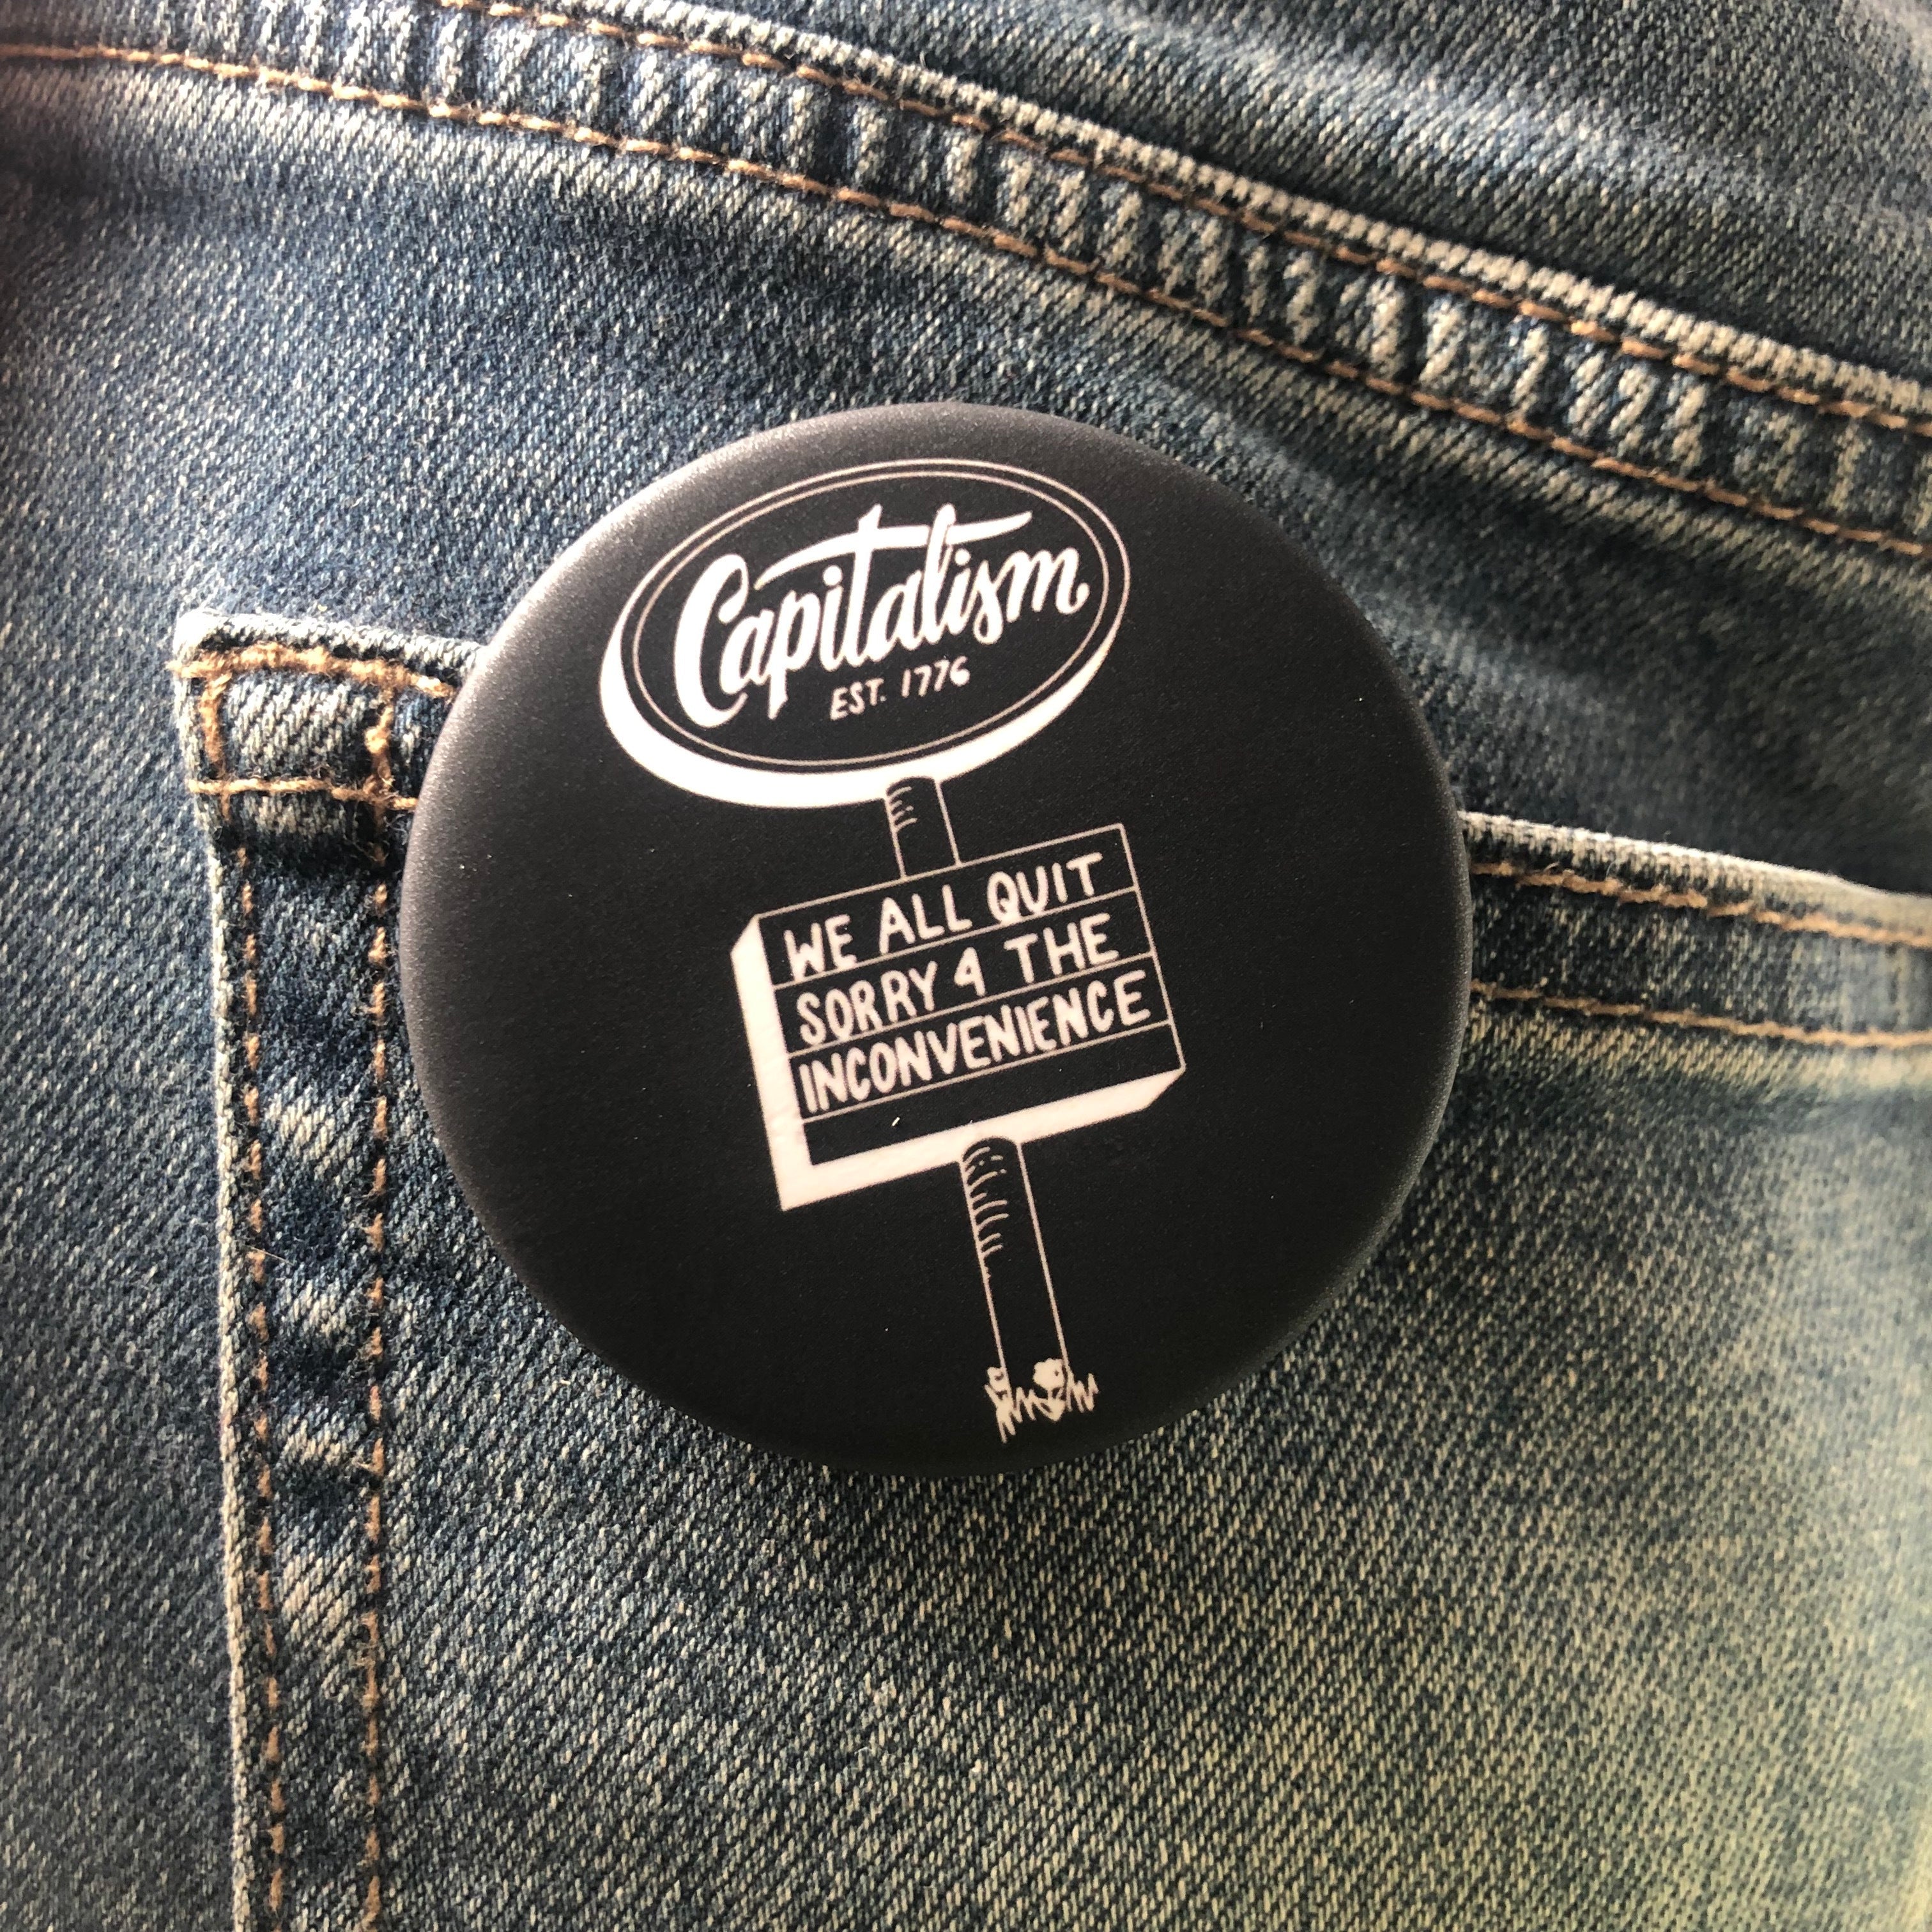 We All Quit Capitalism Button